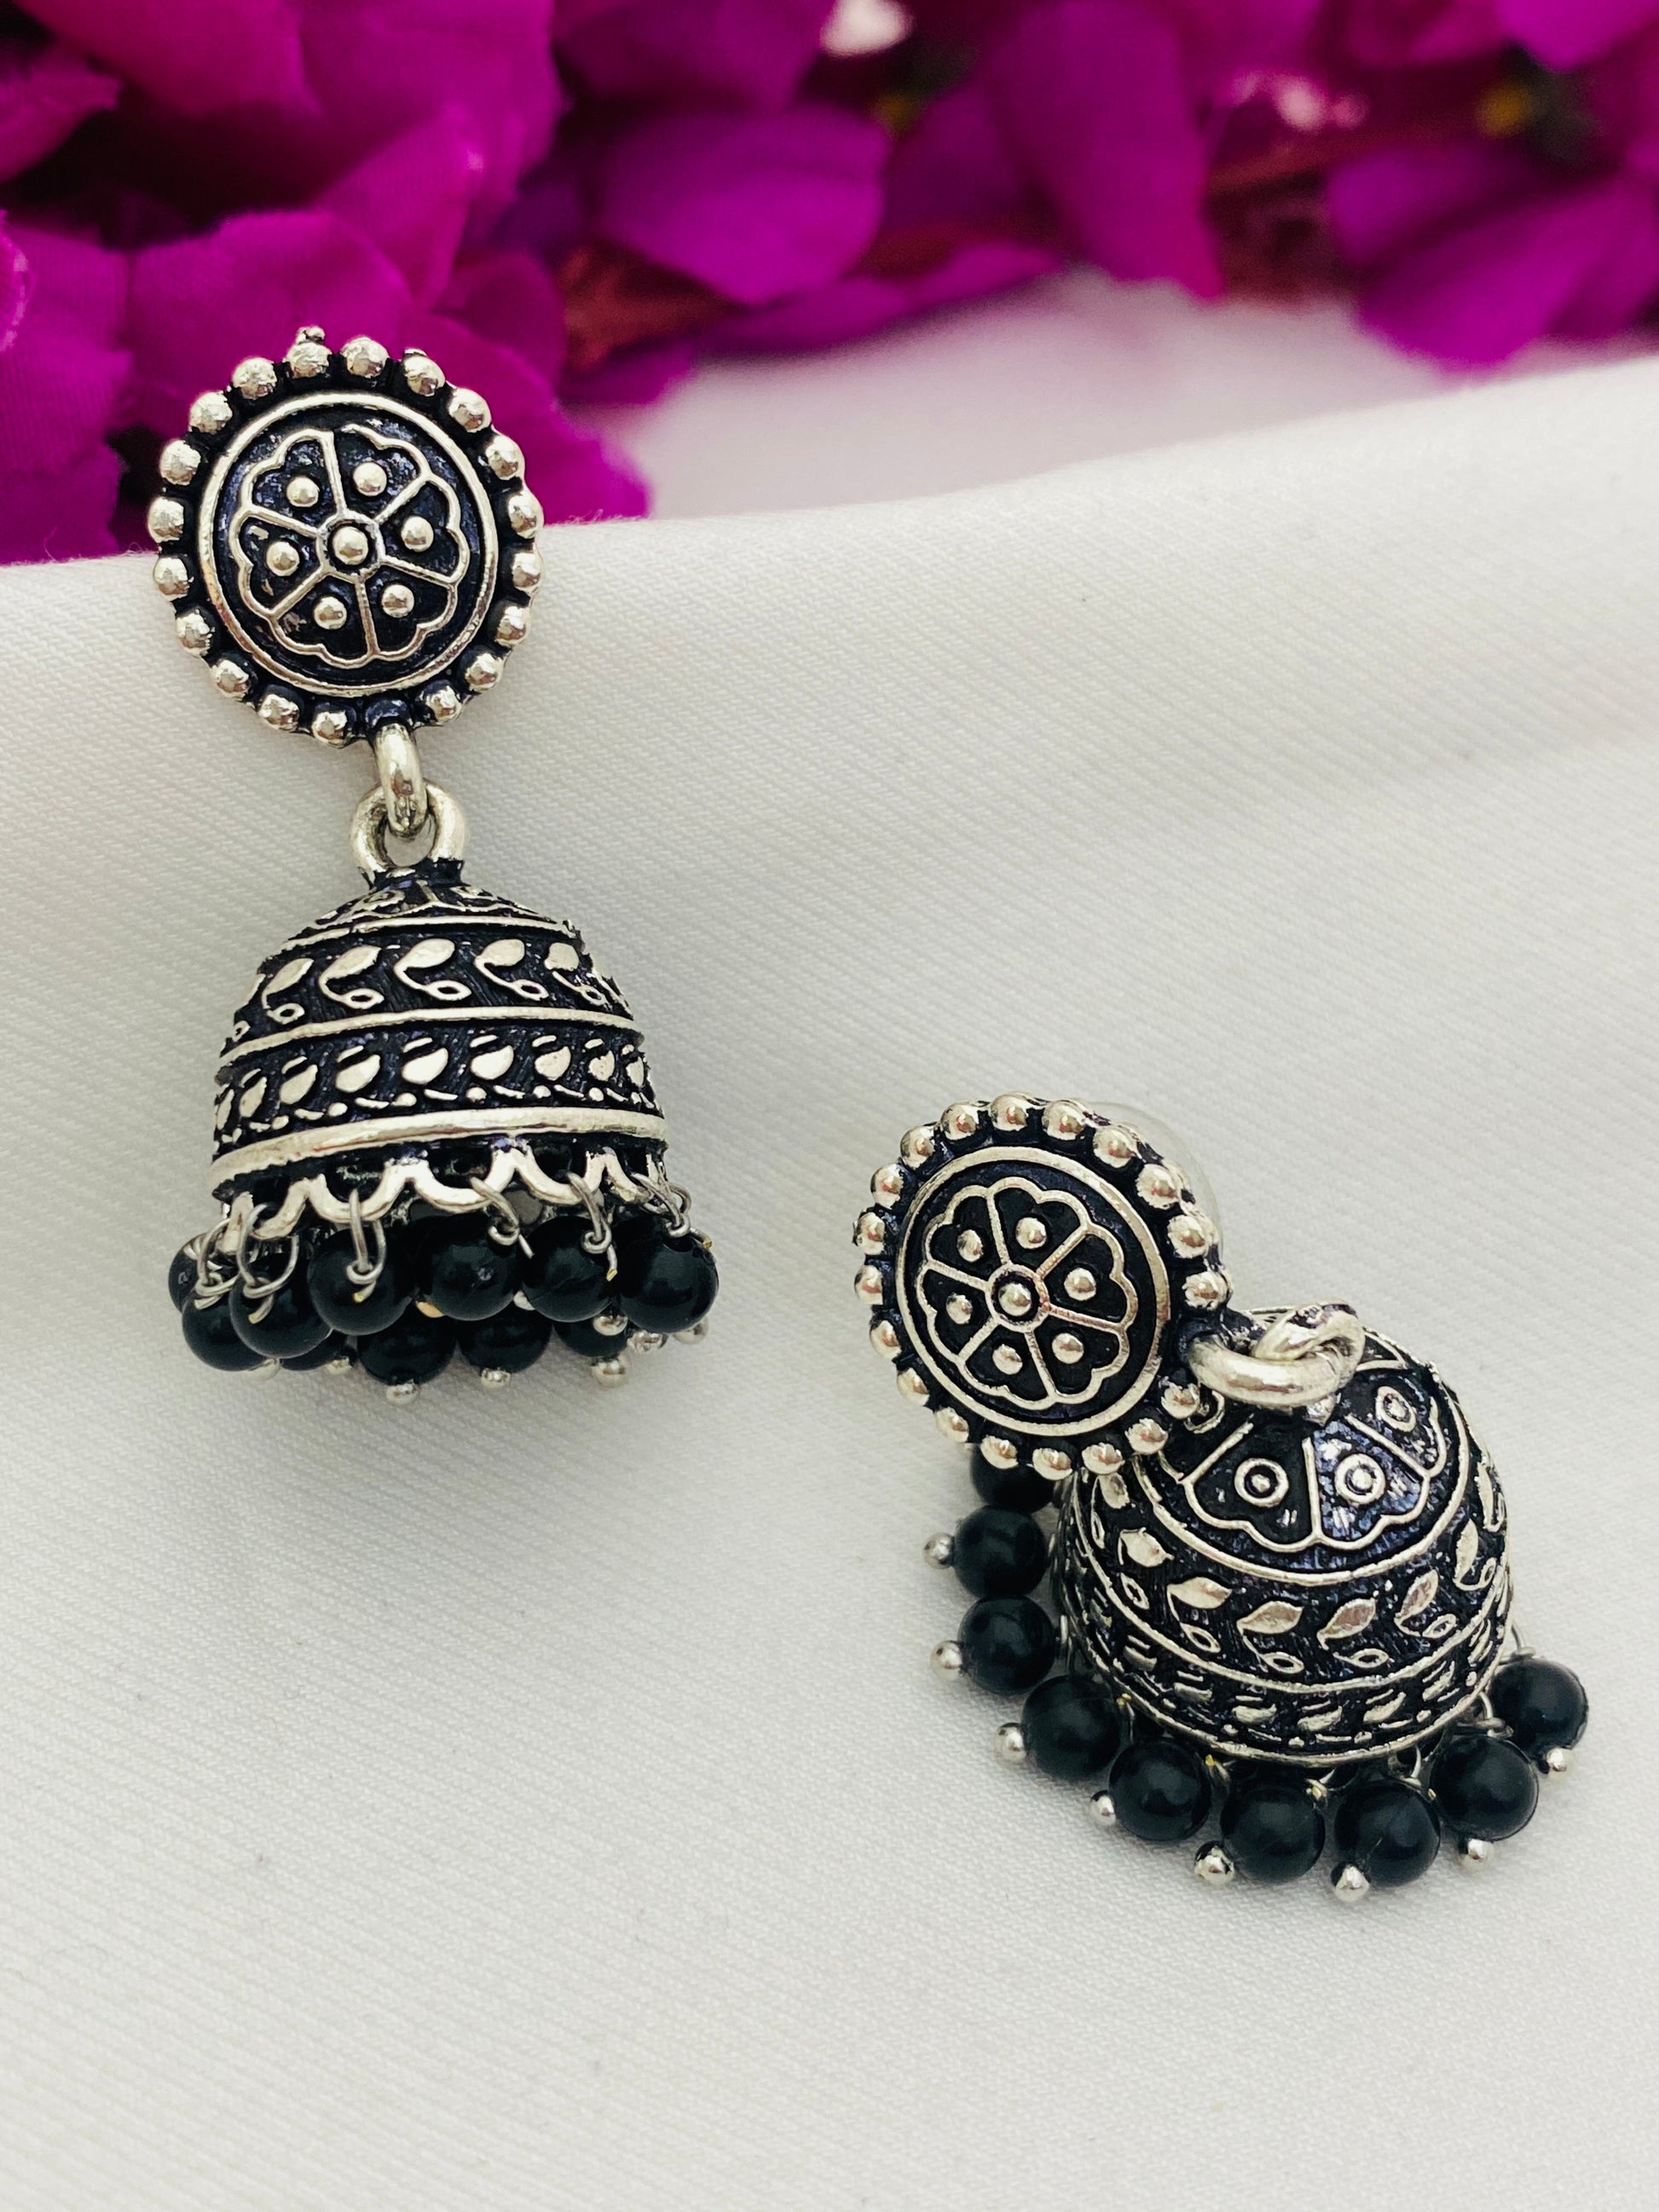  Jhumkas With Black Pearl Drops In Cochise